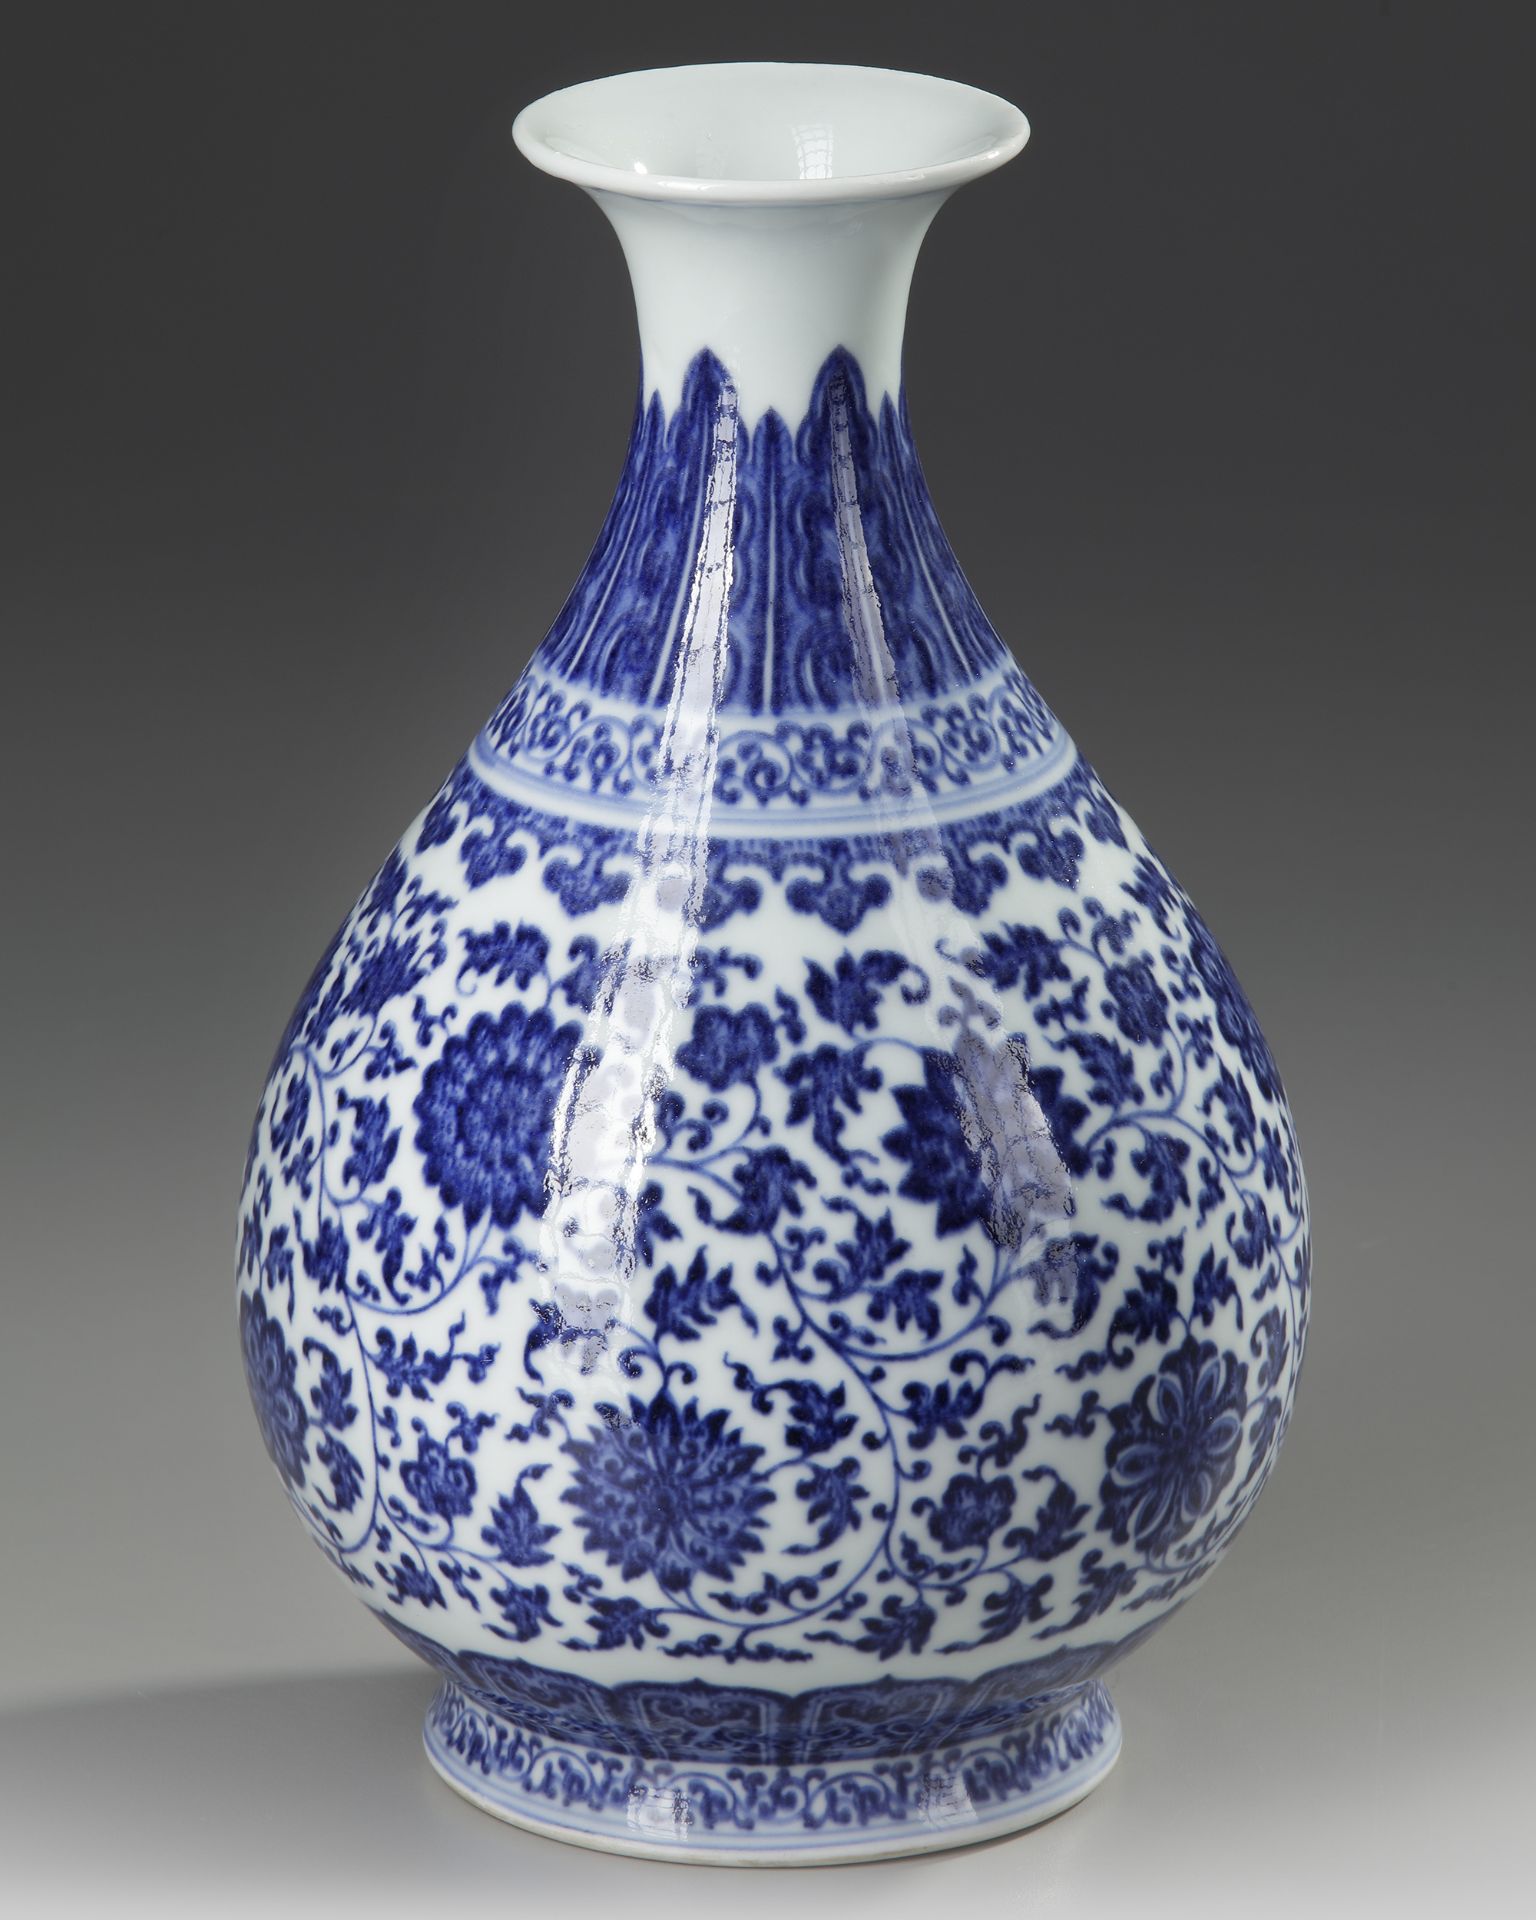 A CHINESE UNDER-GLAZE BLUE AND WHITE MING-STYLE PEAR SHAPED VASE, QING DYNASTY (1644-1911) - Image 2 of 4